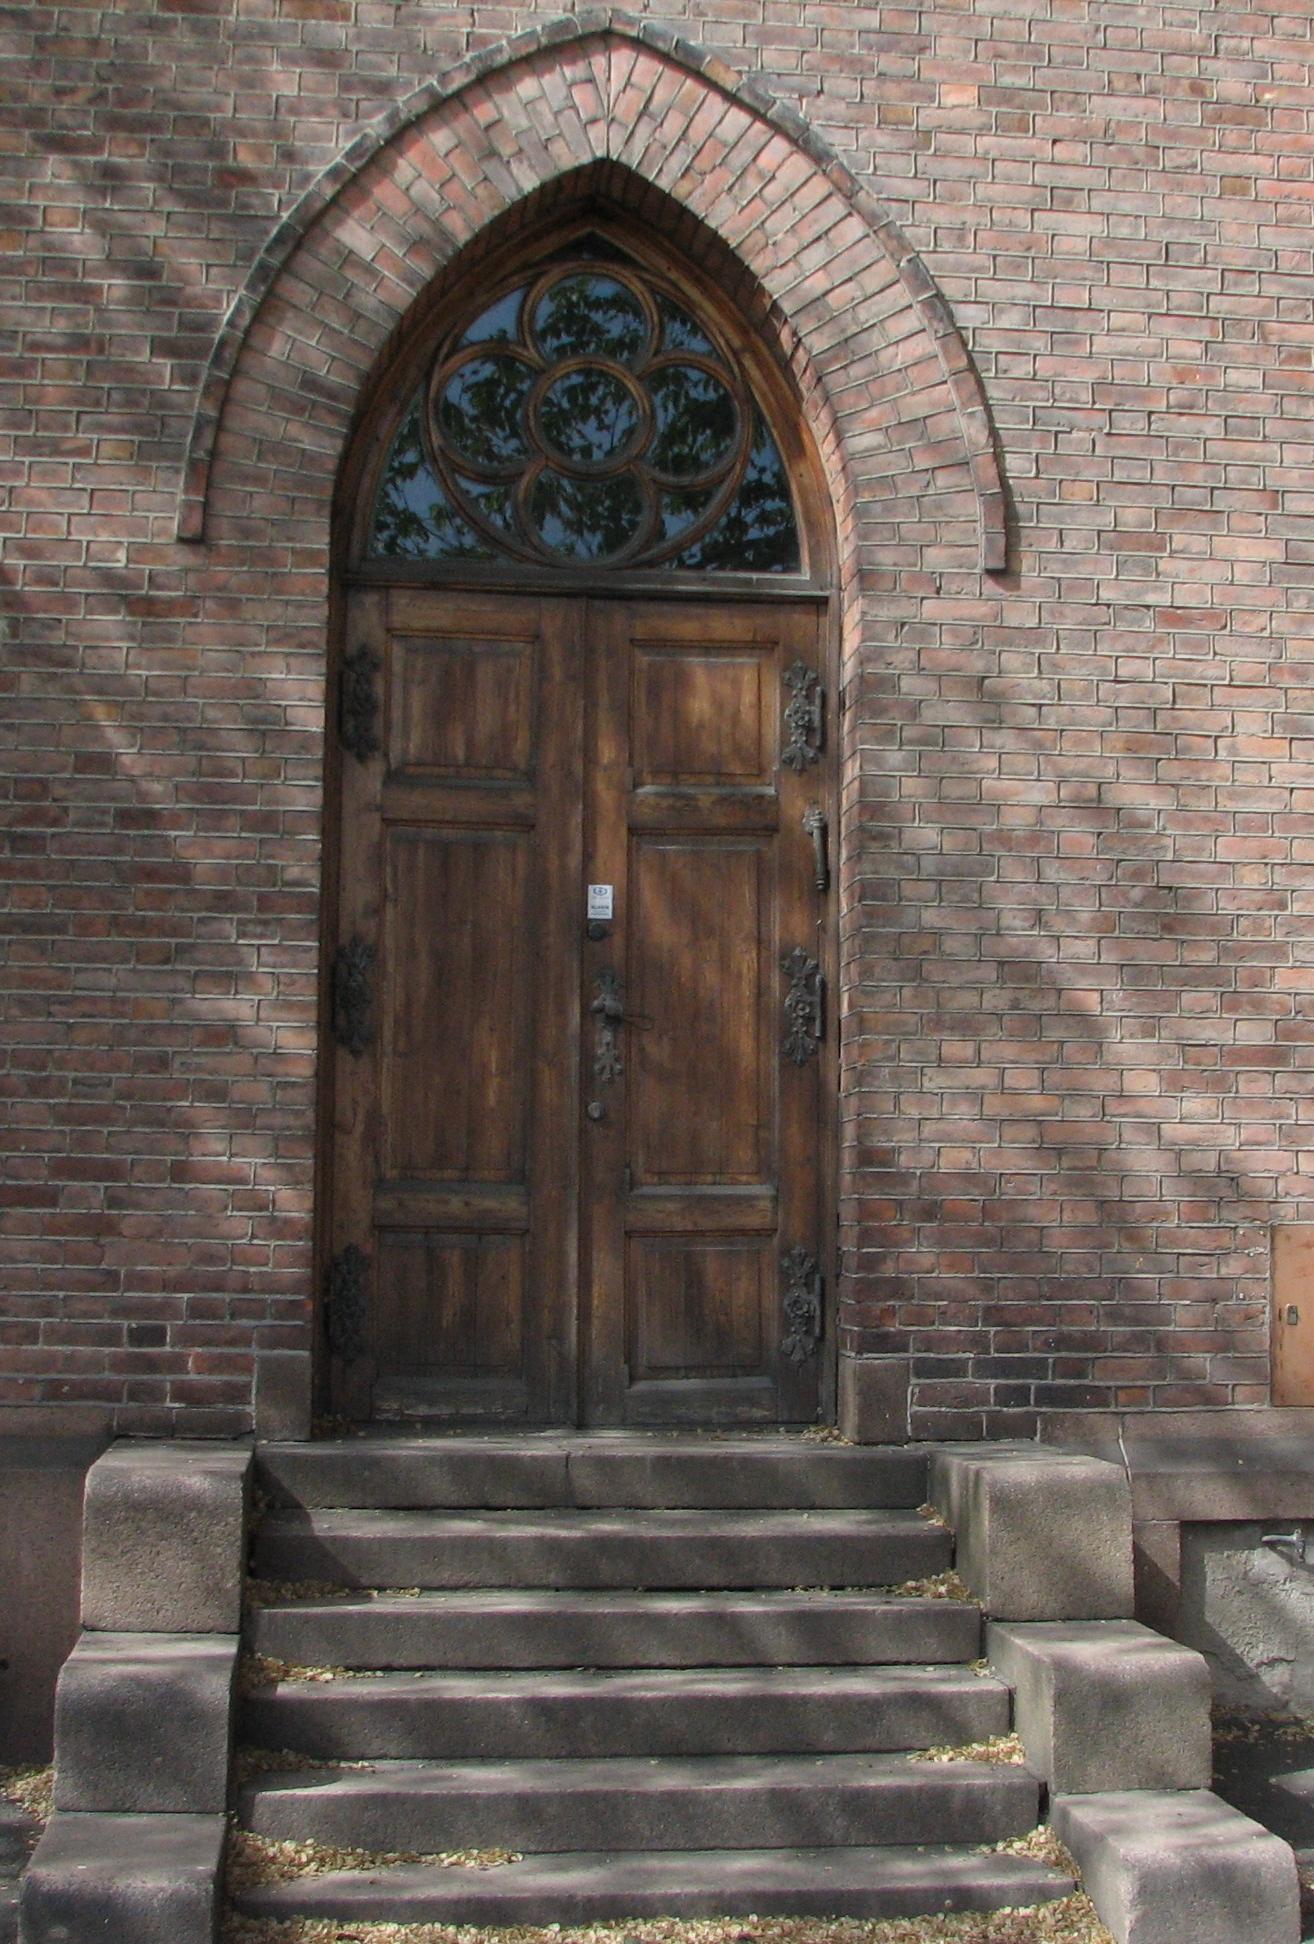 the front doors of an old church and stair case